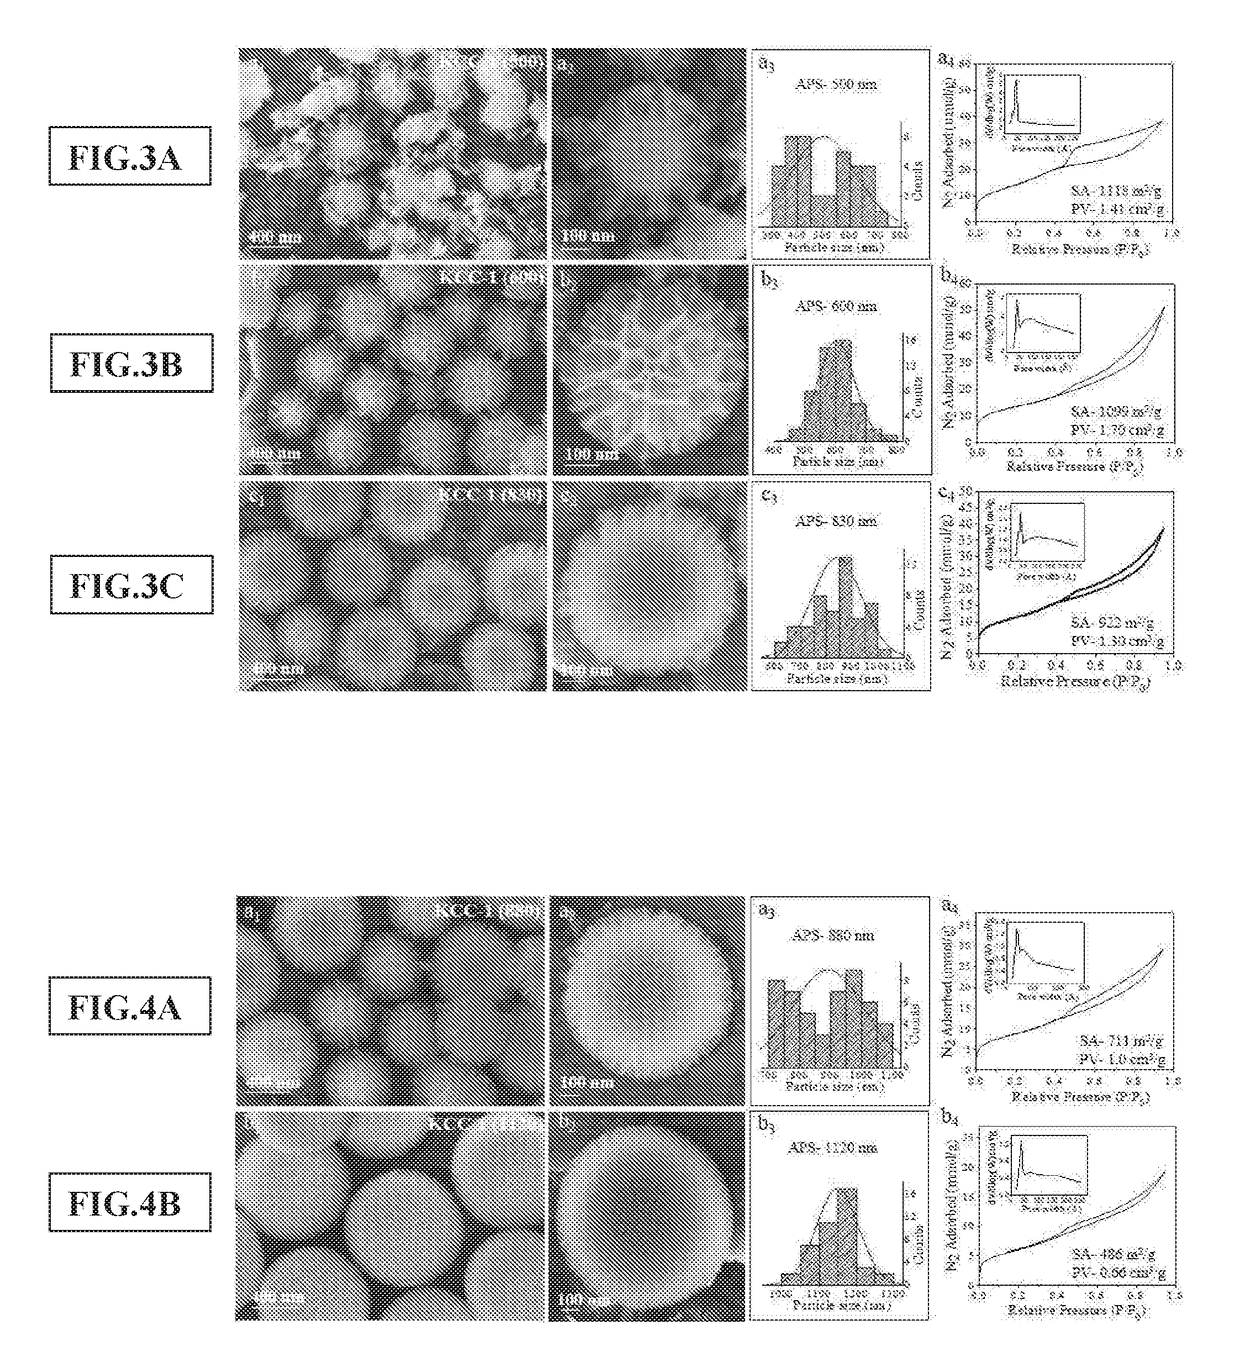 Synthesis of fibrous nano-silica spheres with controlled particle size, fibre density, and various textural properties